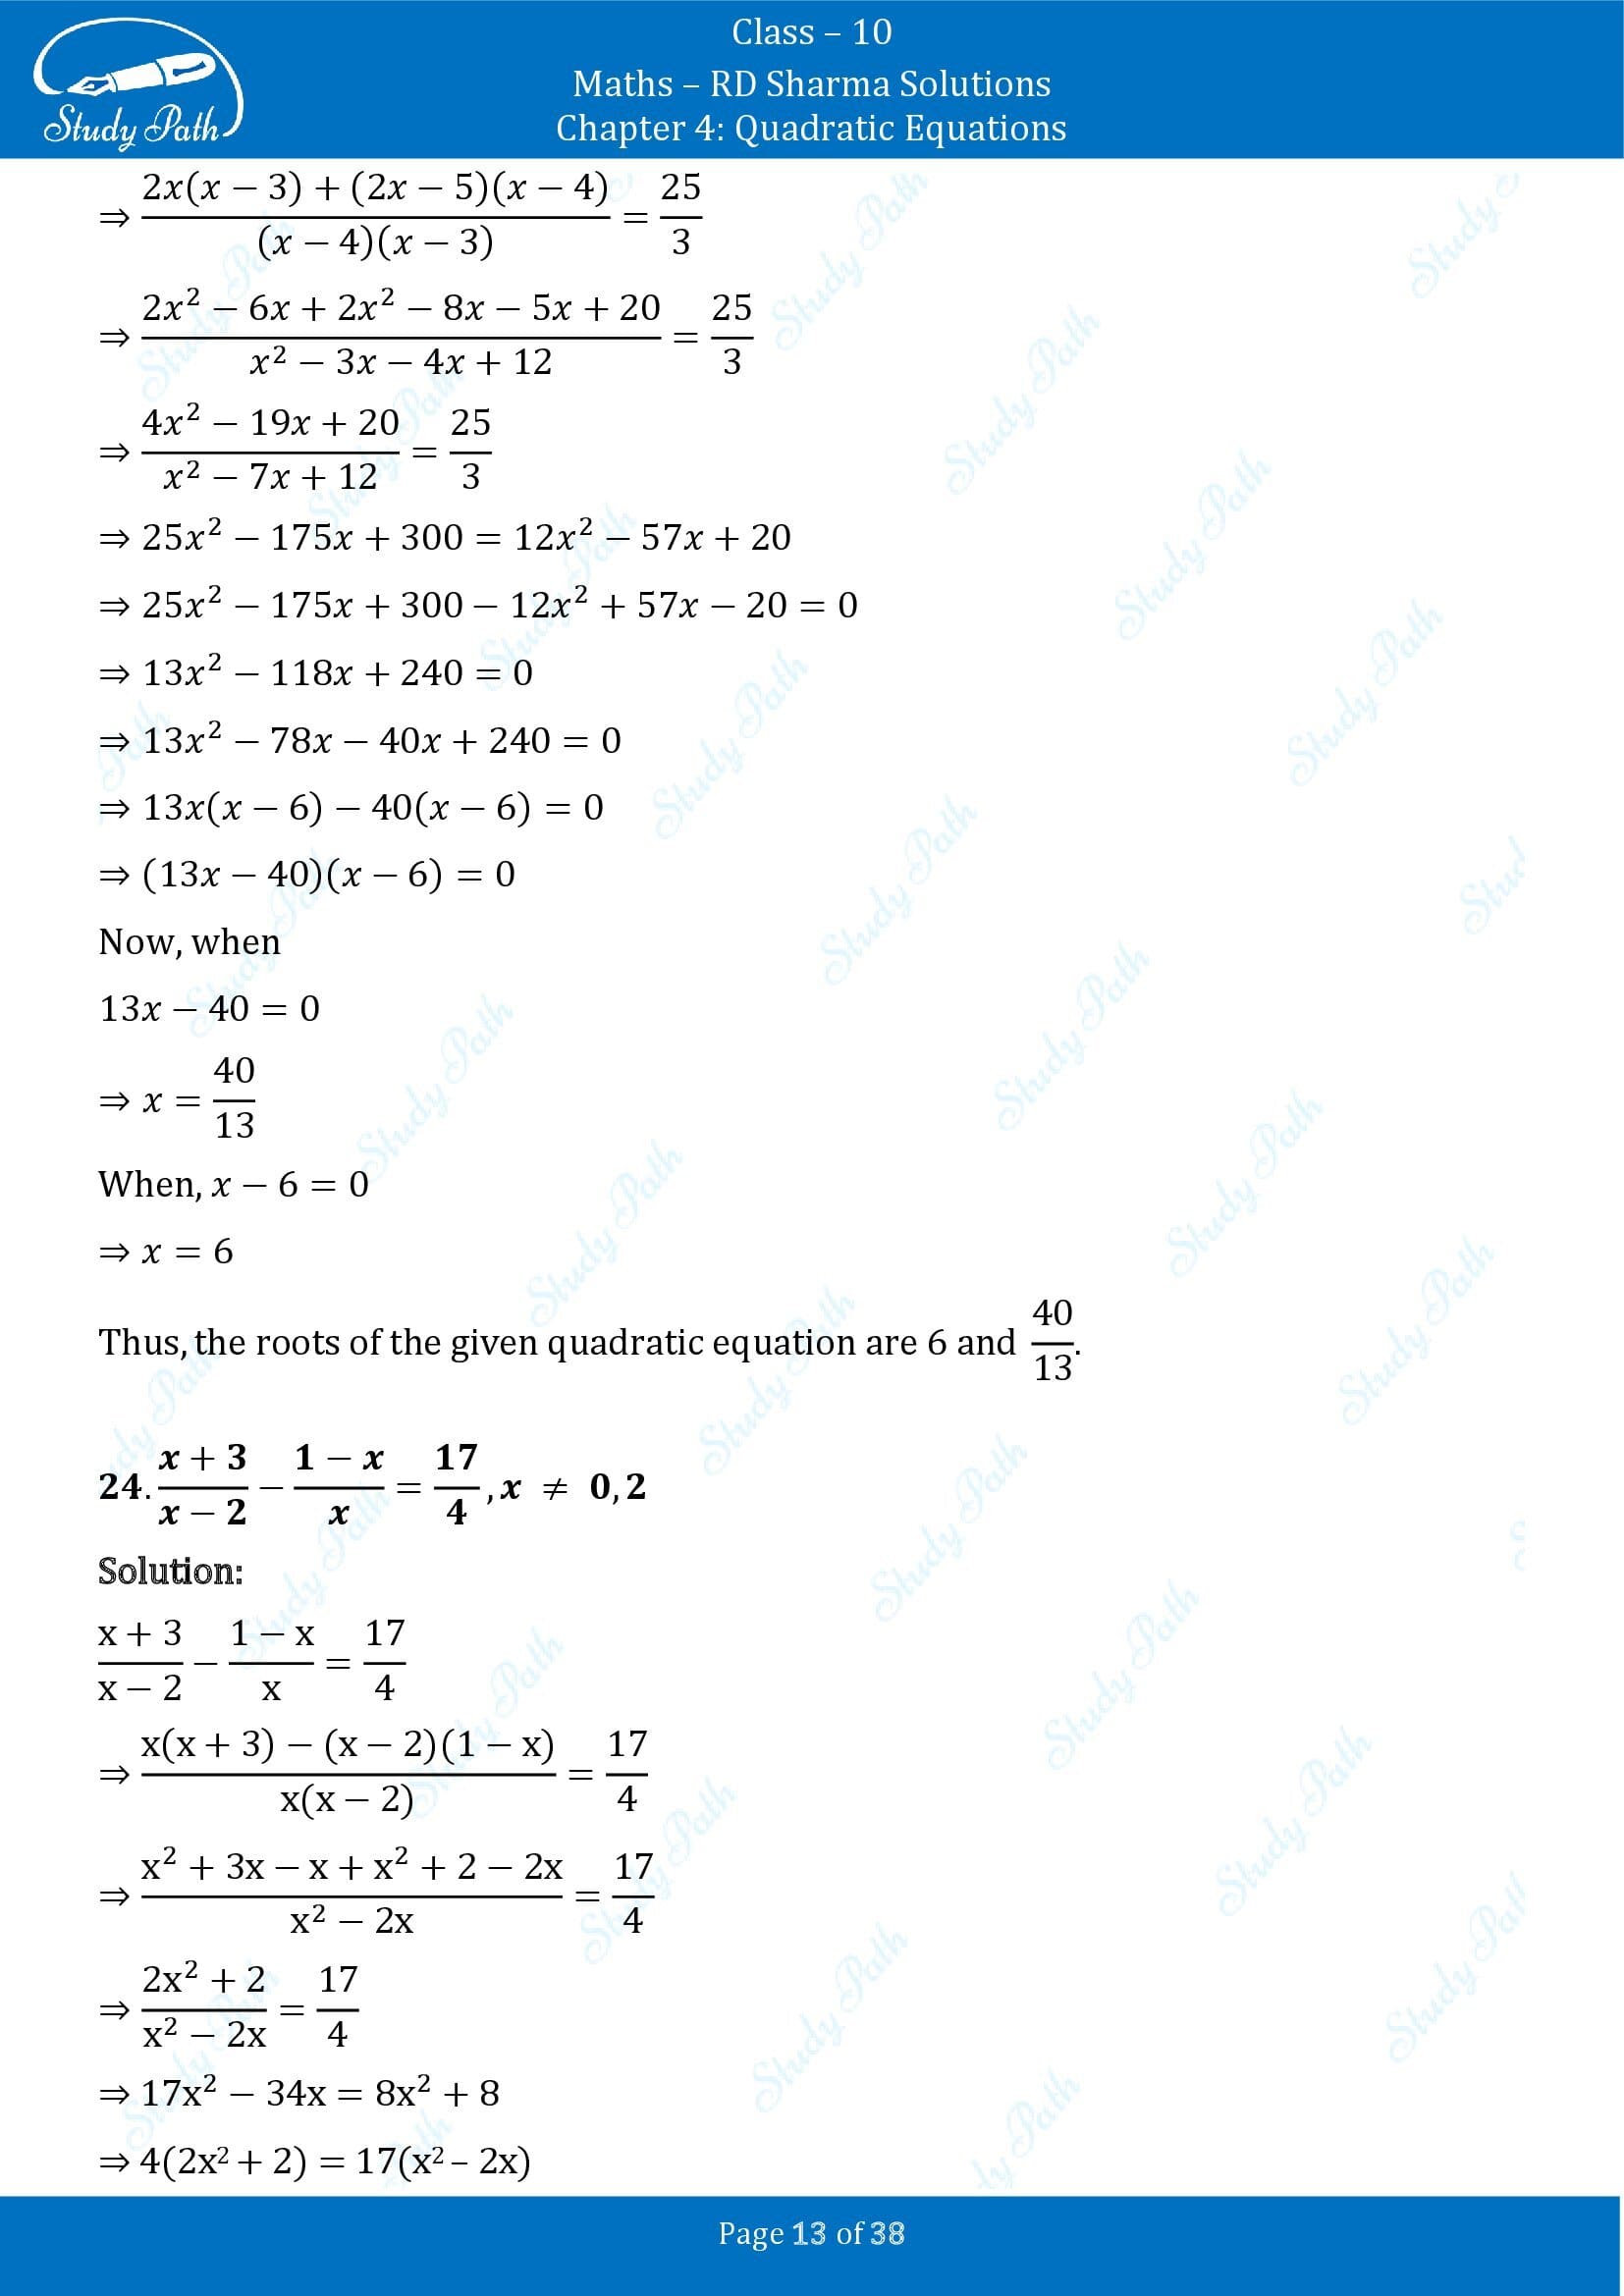 RD Sharma Solutions Class 10 Chapter 4 Quadratic Equations Exercise 4.3 00013